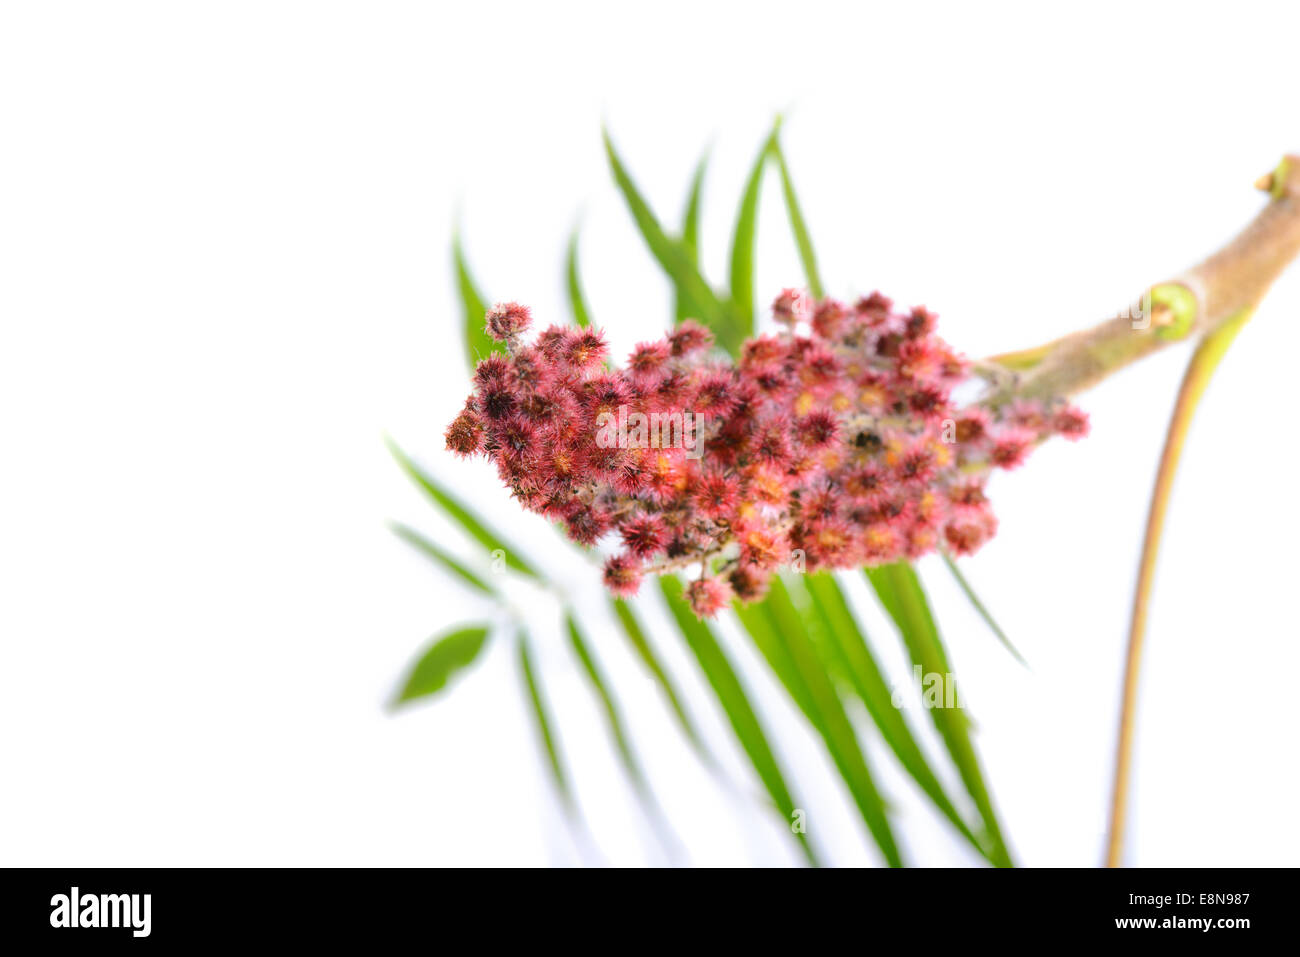 Rhus typhina flower with leaves Stock Photo